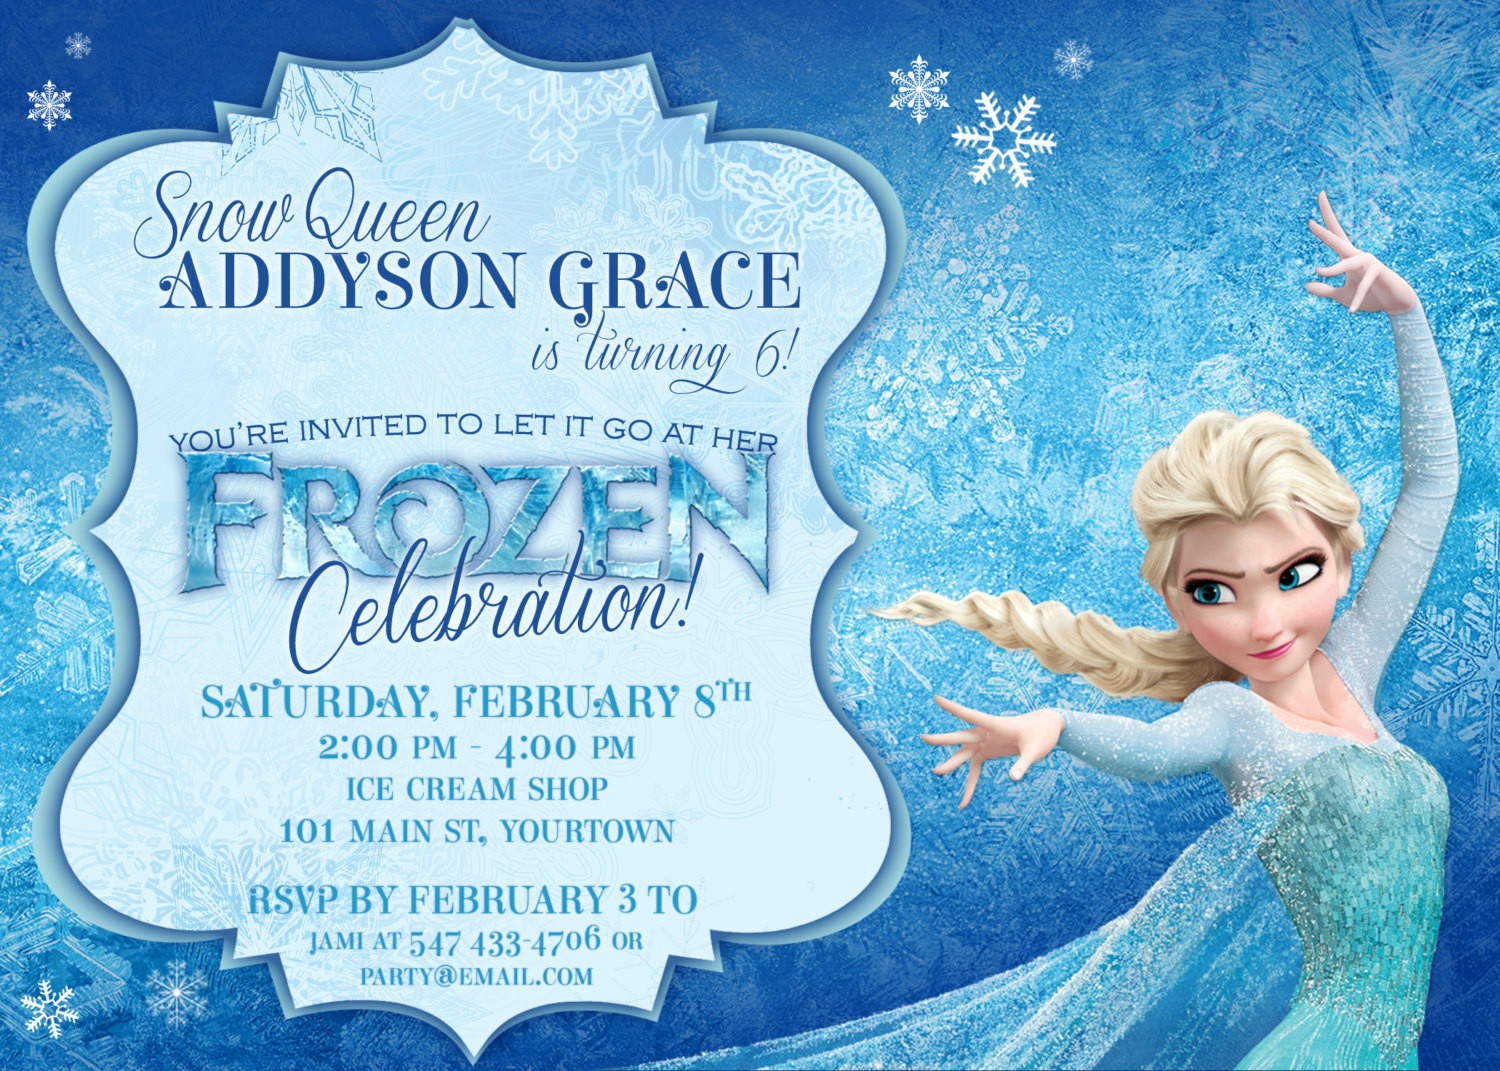 Themed Birthday Party Invitations
 FROZEN Themed Party Invitations Printable PDFs Elsa and